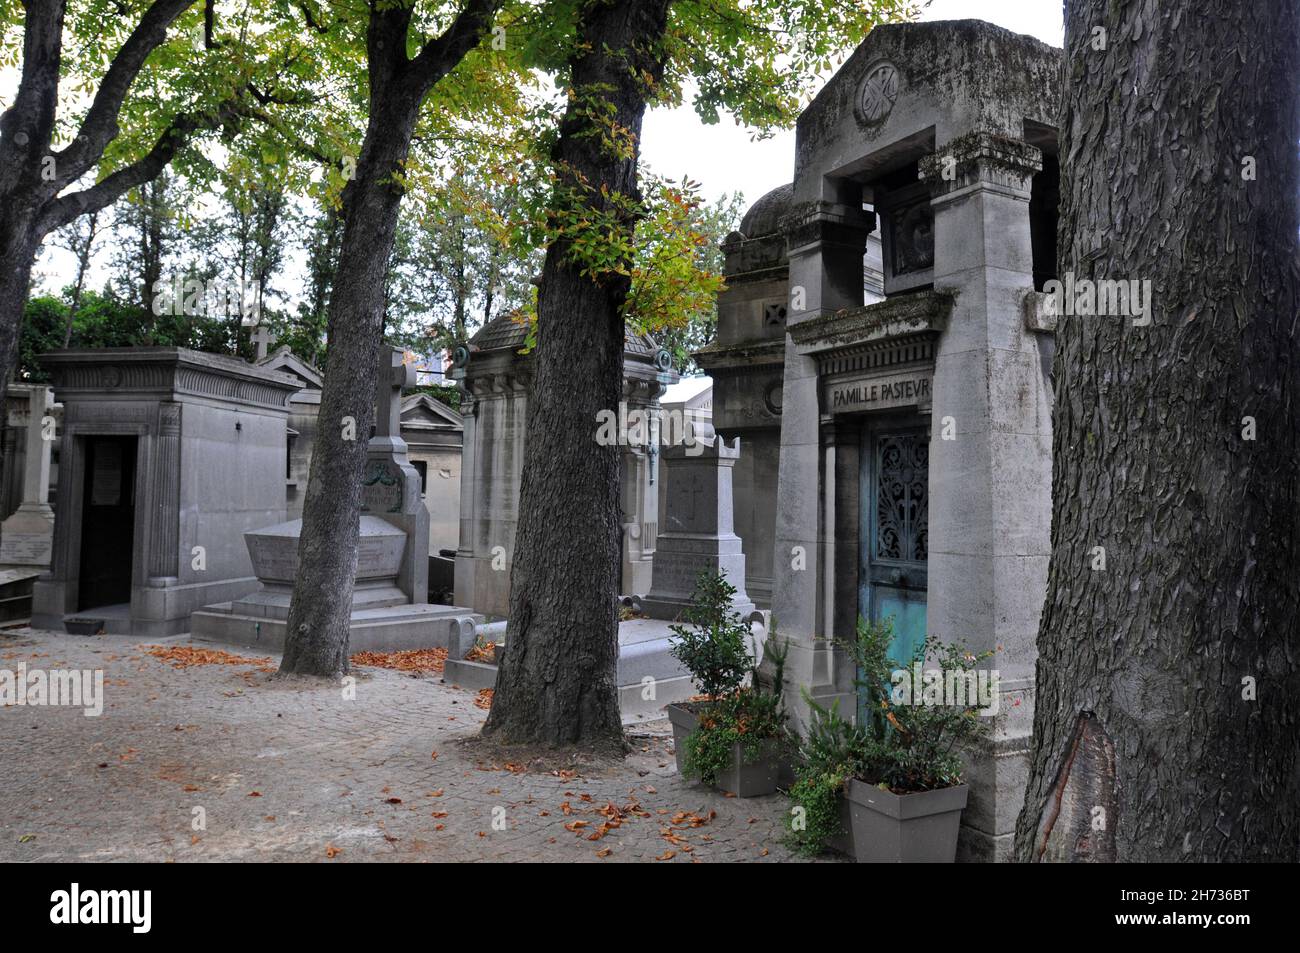 Trees and grand mausoleums line the paths at the historic Passy Cemetery (Cimetière de Passy) in Paris, which opened in 1820. Stock Photo